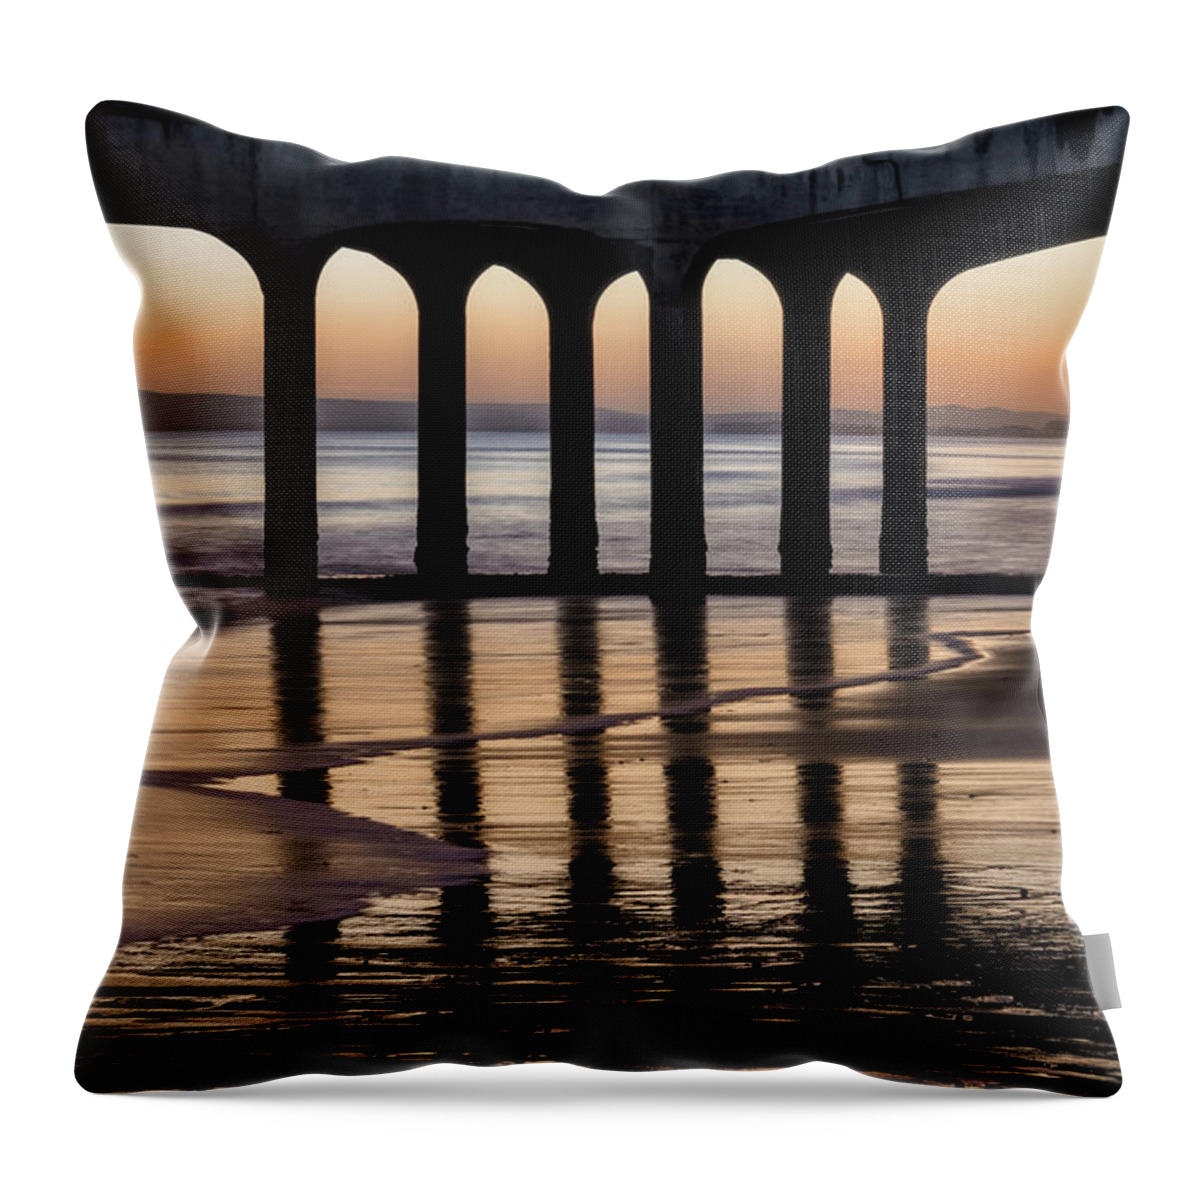 Boscombe Pier Throw Pillow featuring the photograph Boscombe - England #4 by Joana Kruse